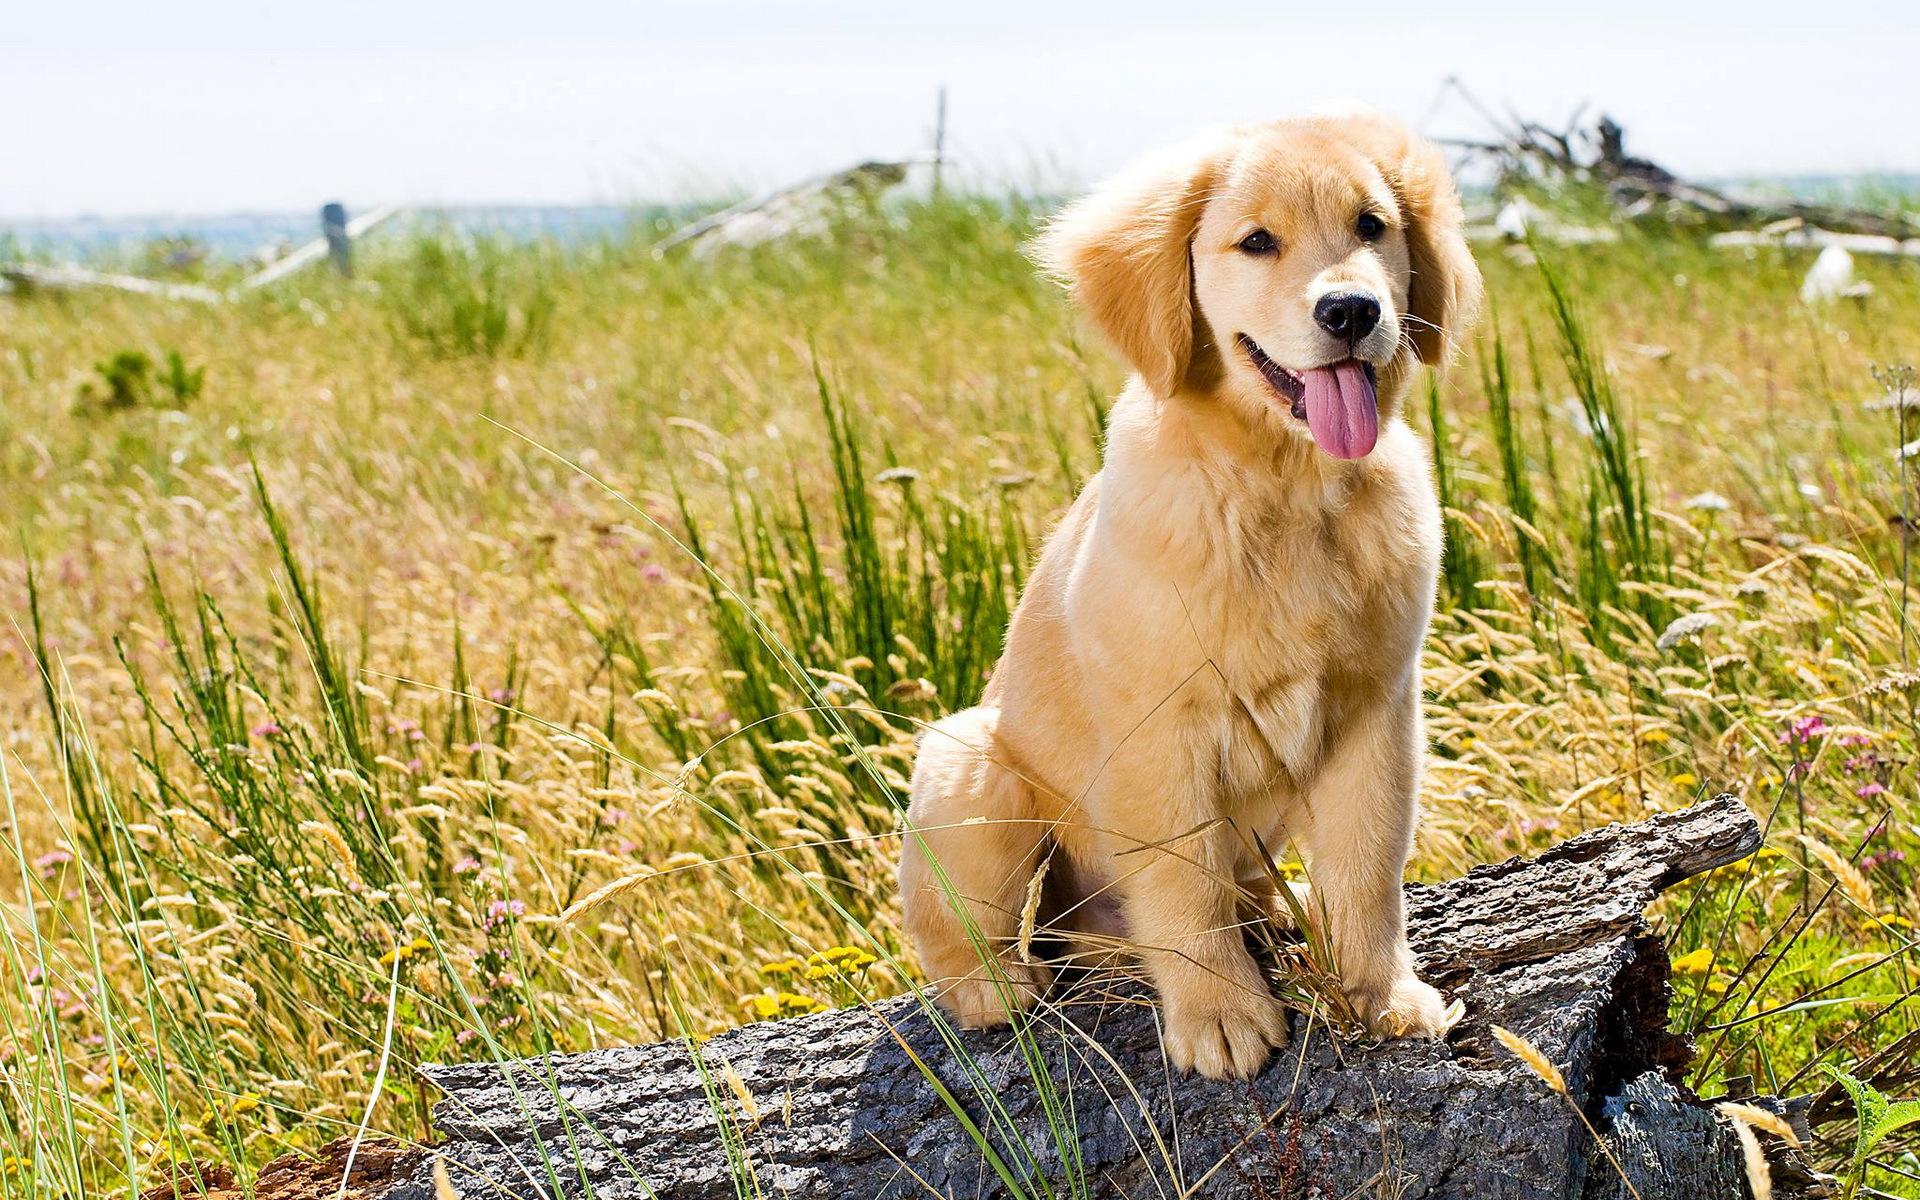 Top 10 Cutest Golden Retriever Puppies | All Puppies Pictures and ...